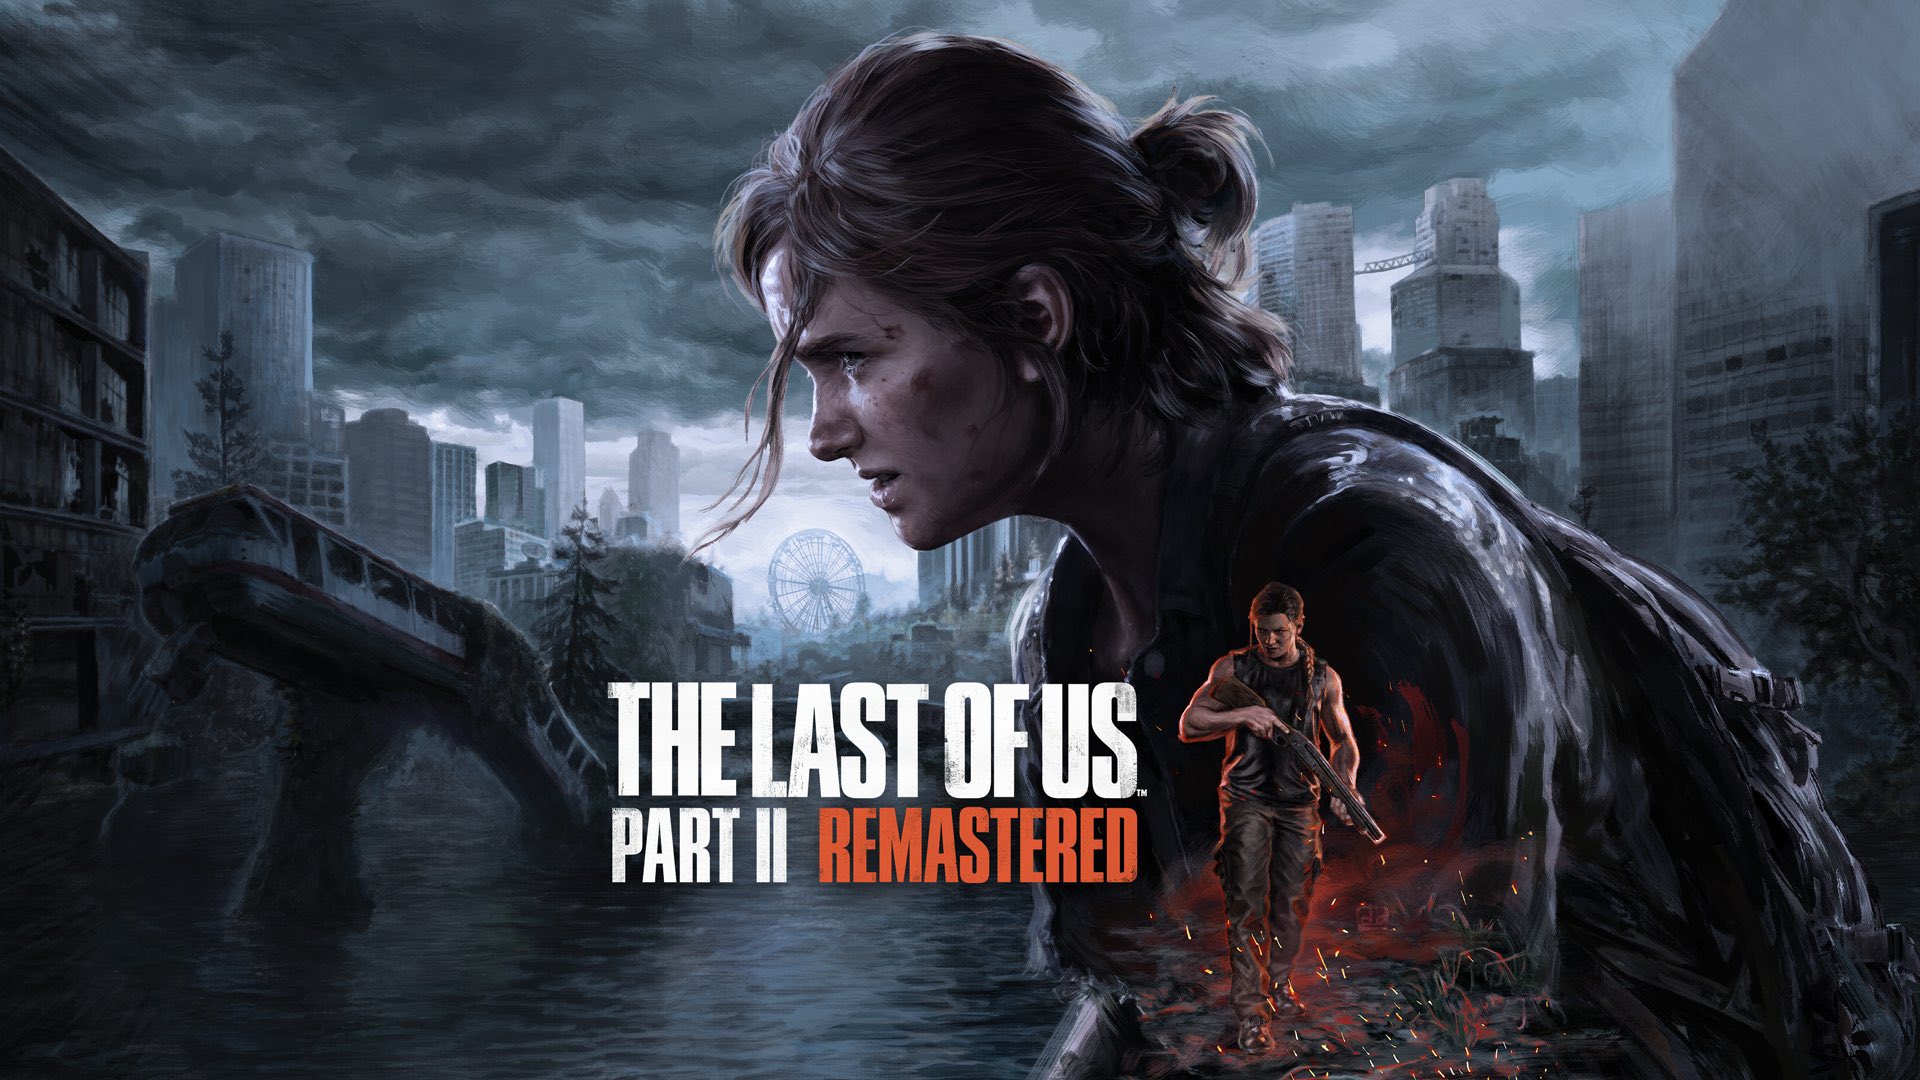 The Last of Us Part 2 Remastered – Composer Gustavo Santaolalla is Playable in Guitar Free Play